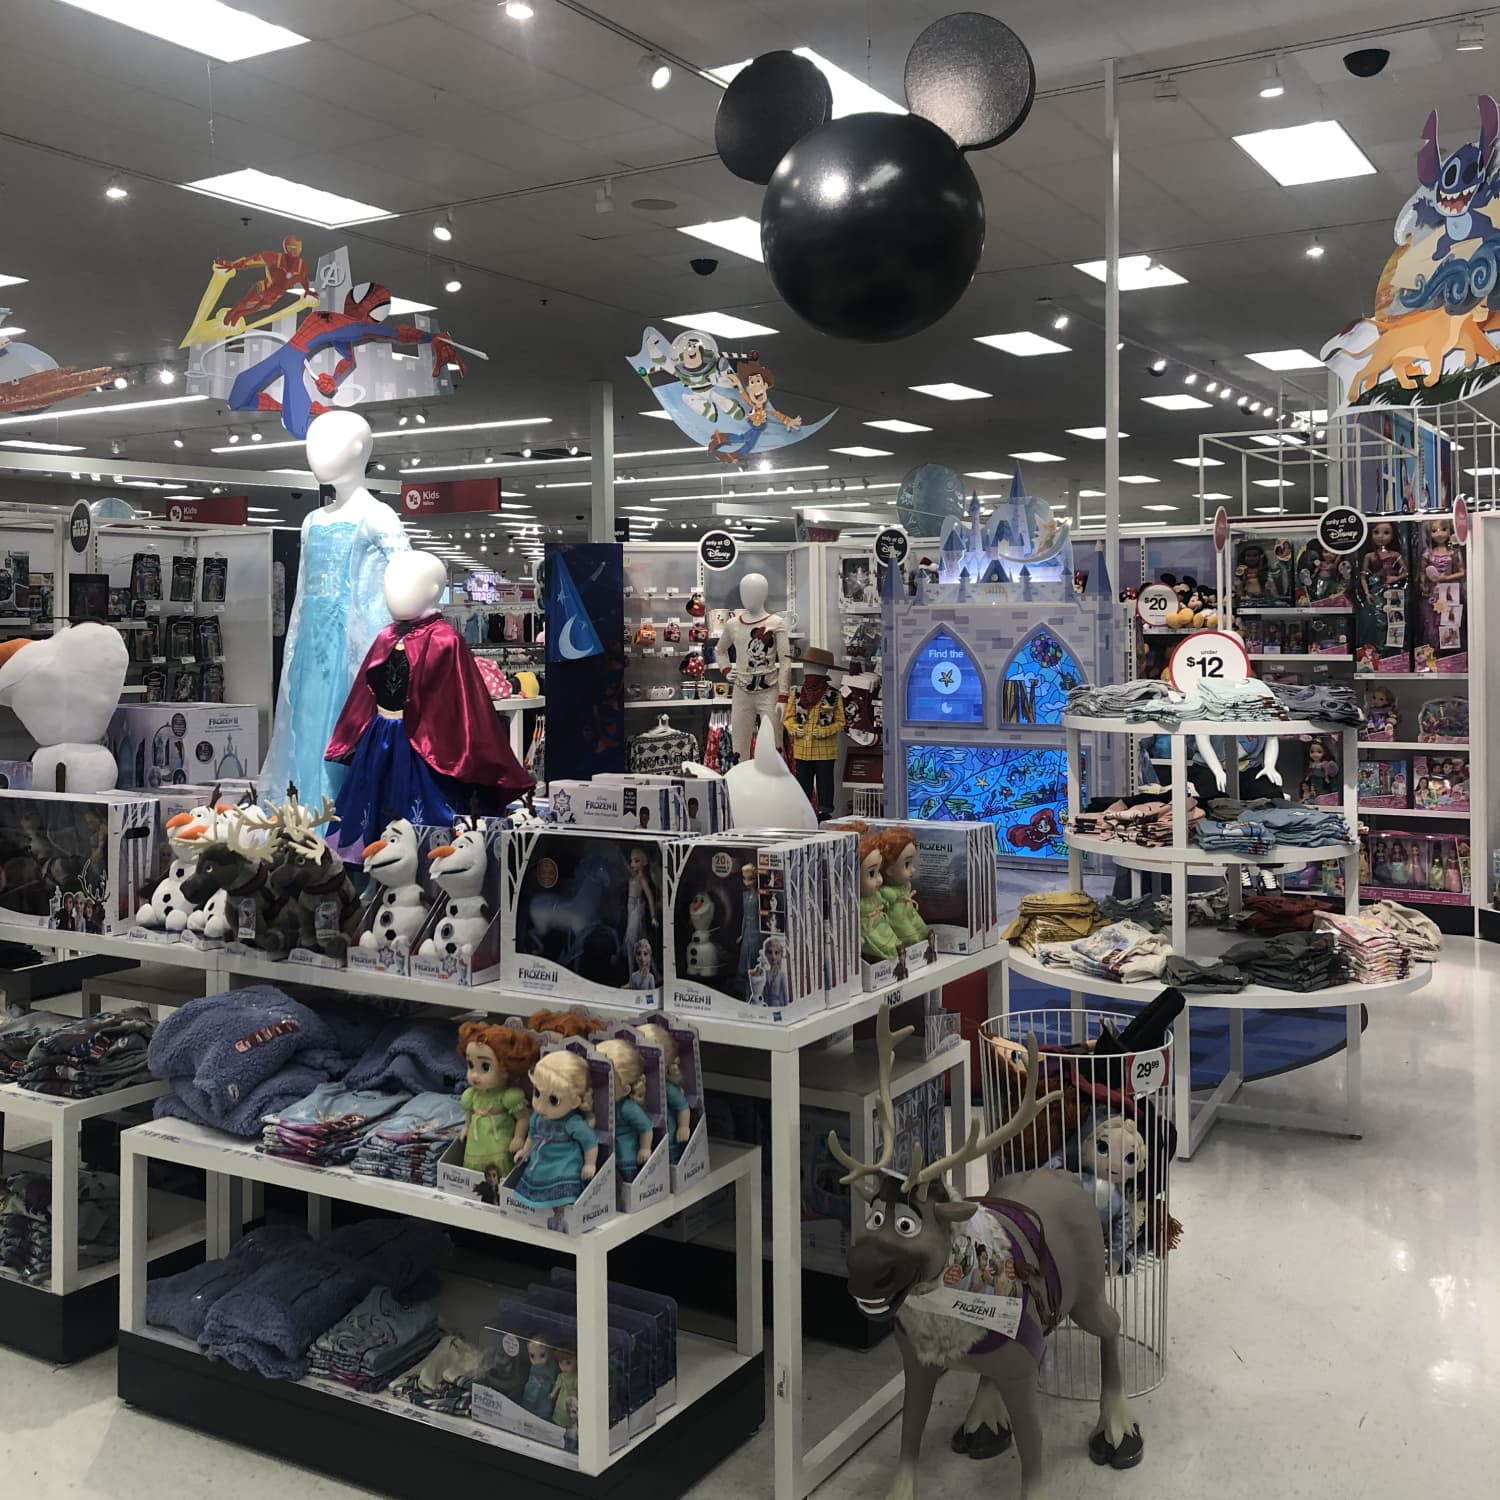 I Visited a Disney Store Inside Target and It Was Magical